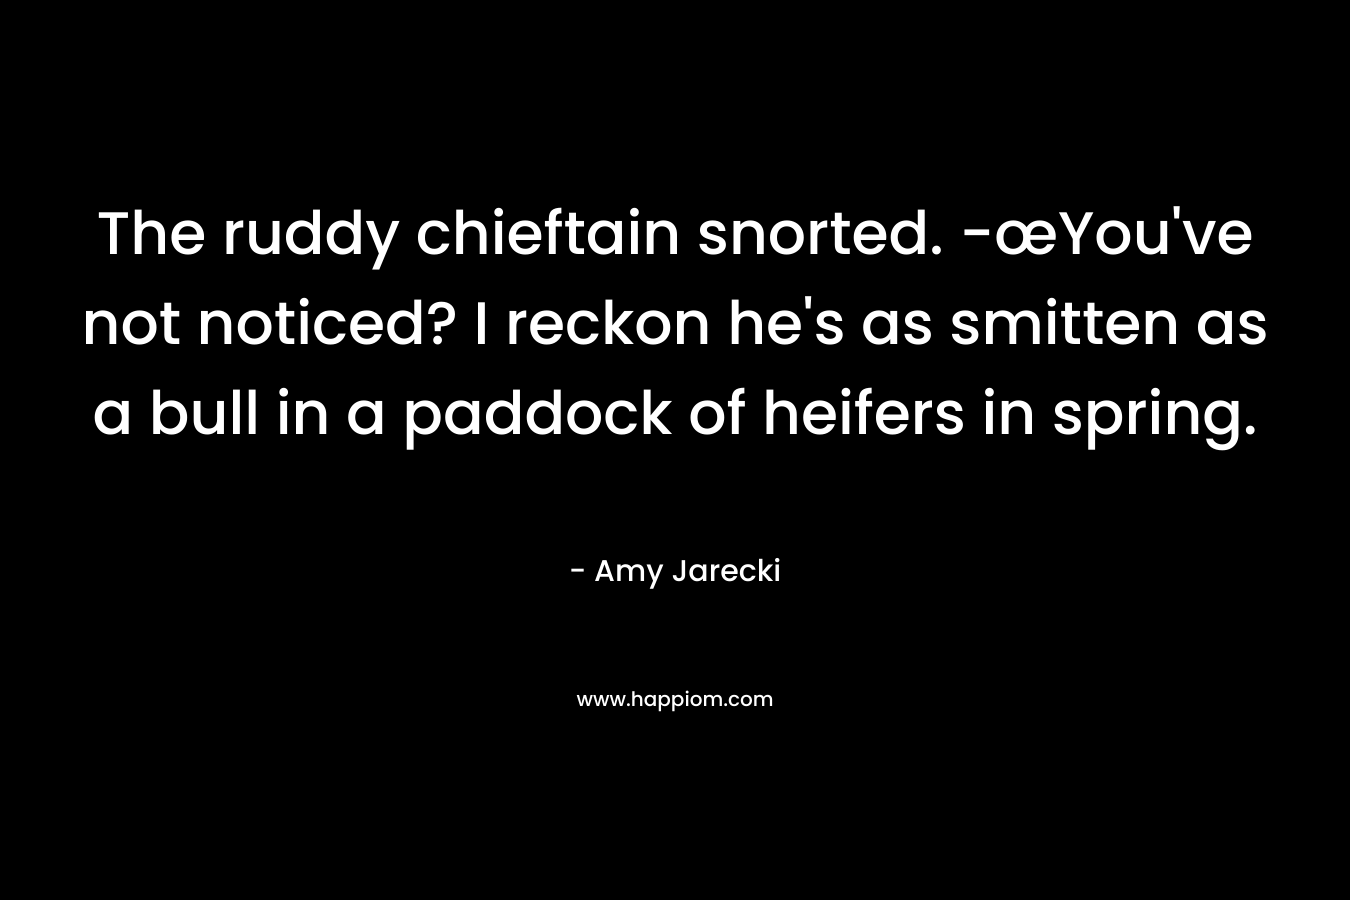 The ruddy chieftain snorted. -œYou’ve not noticed? I reckon he’s as smitten as a bull in a paddock of heifers in spring. – Amy Jarecki